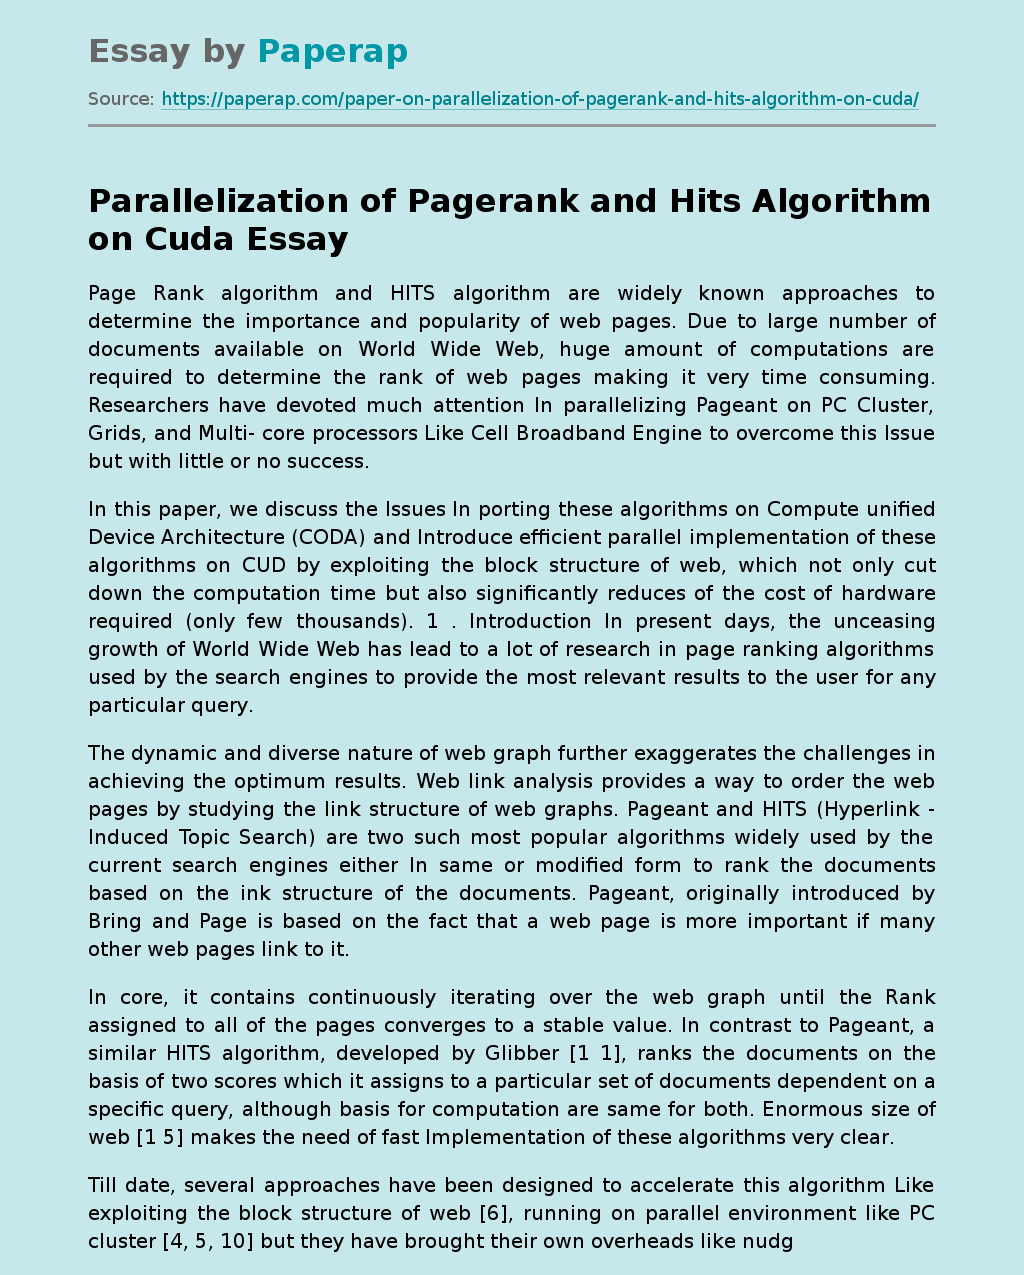 Parallelization of Pagerank and Hits Algorithm on Cuda